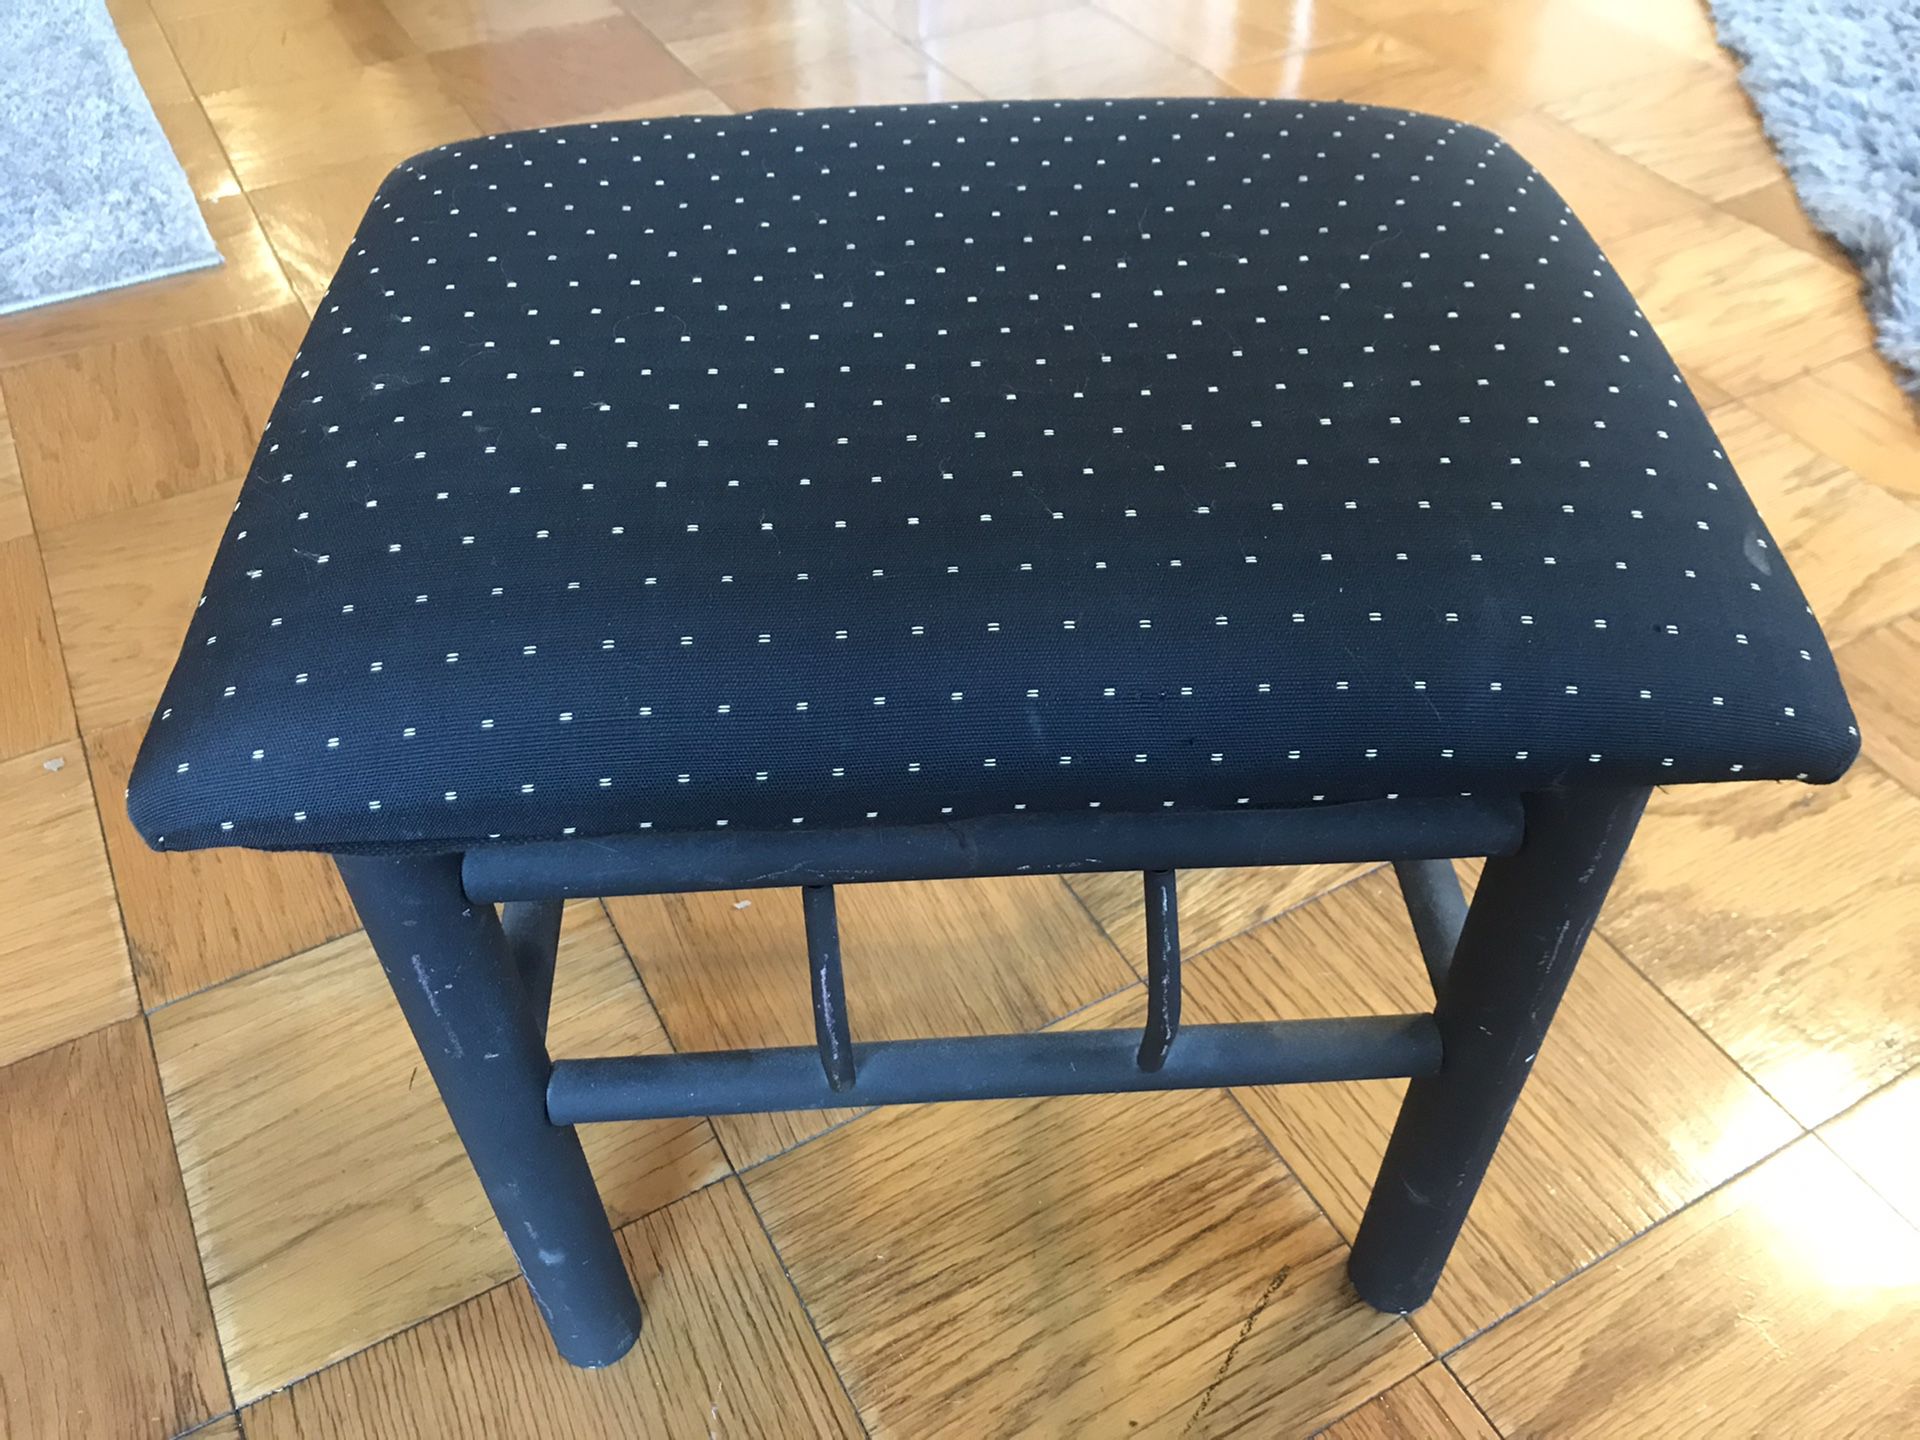 Black Gold Bench ($10 Great Deal!)